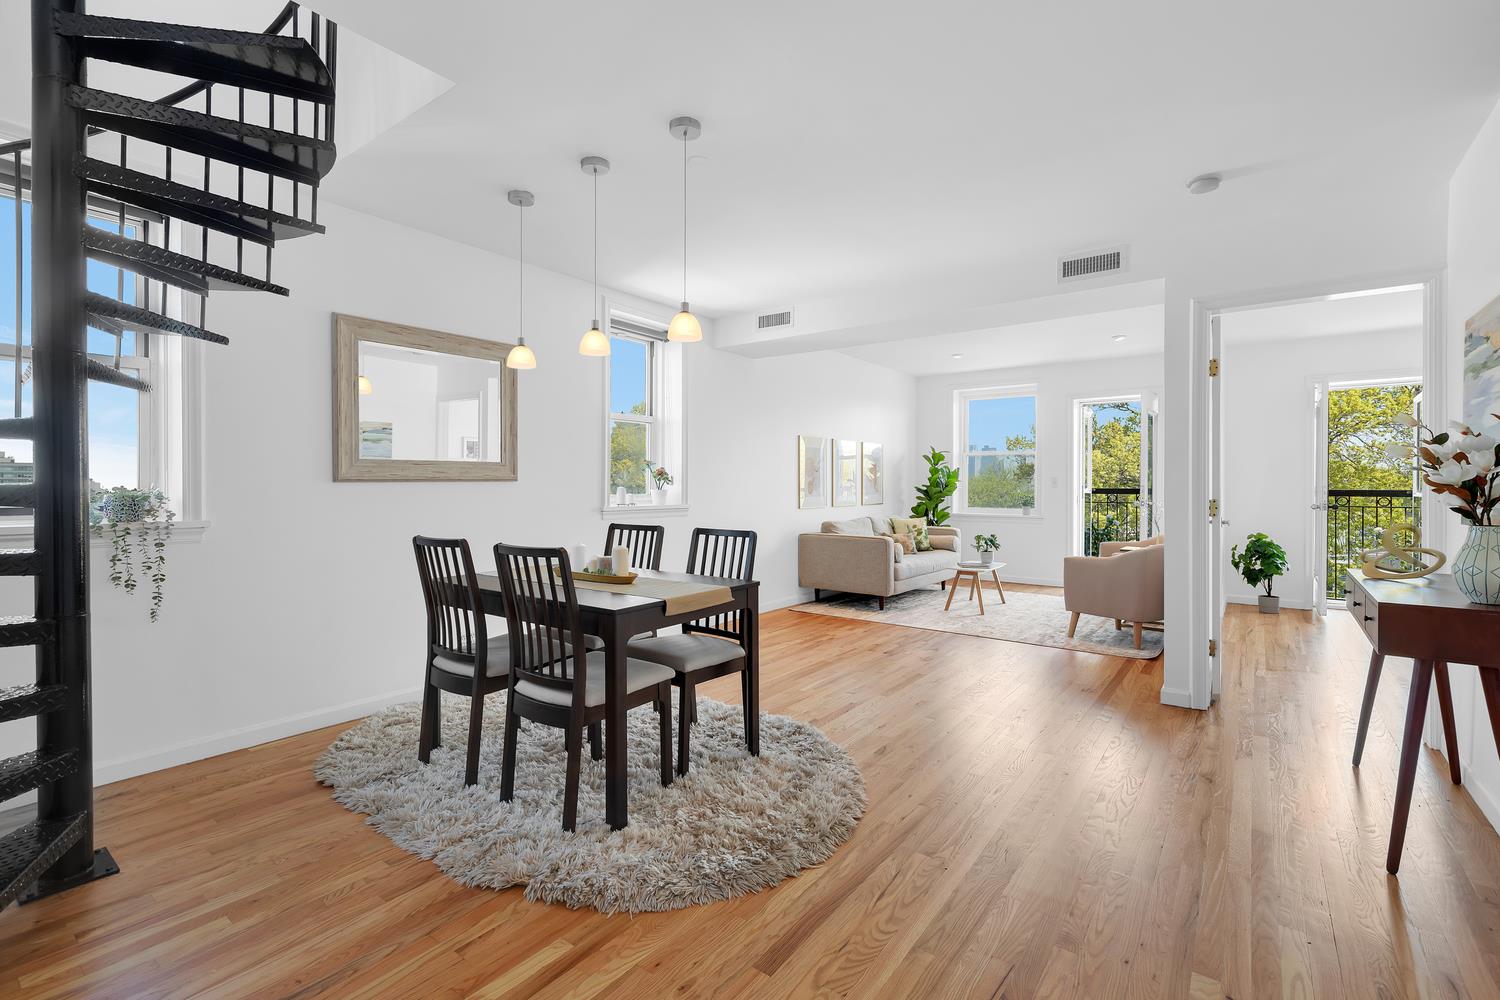 392 11th Street 5B, South Slope, Brooklyn, New York - 3 Bedrooms  
3.5 Bathrooms  
7 Rooms - 